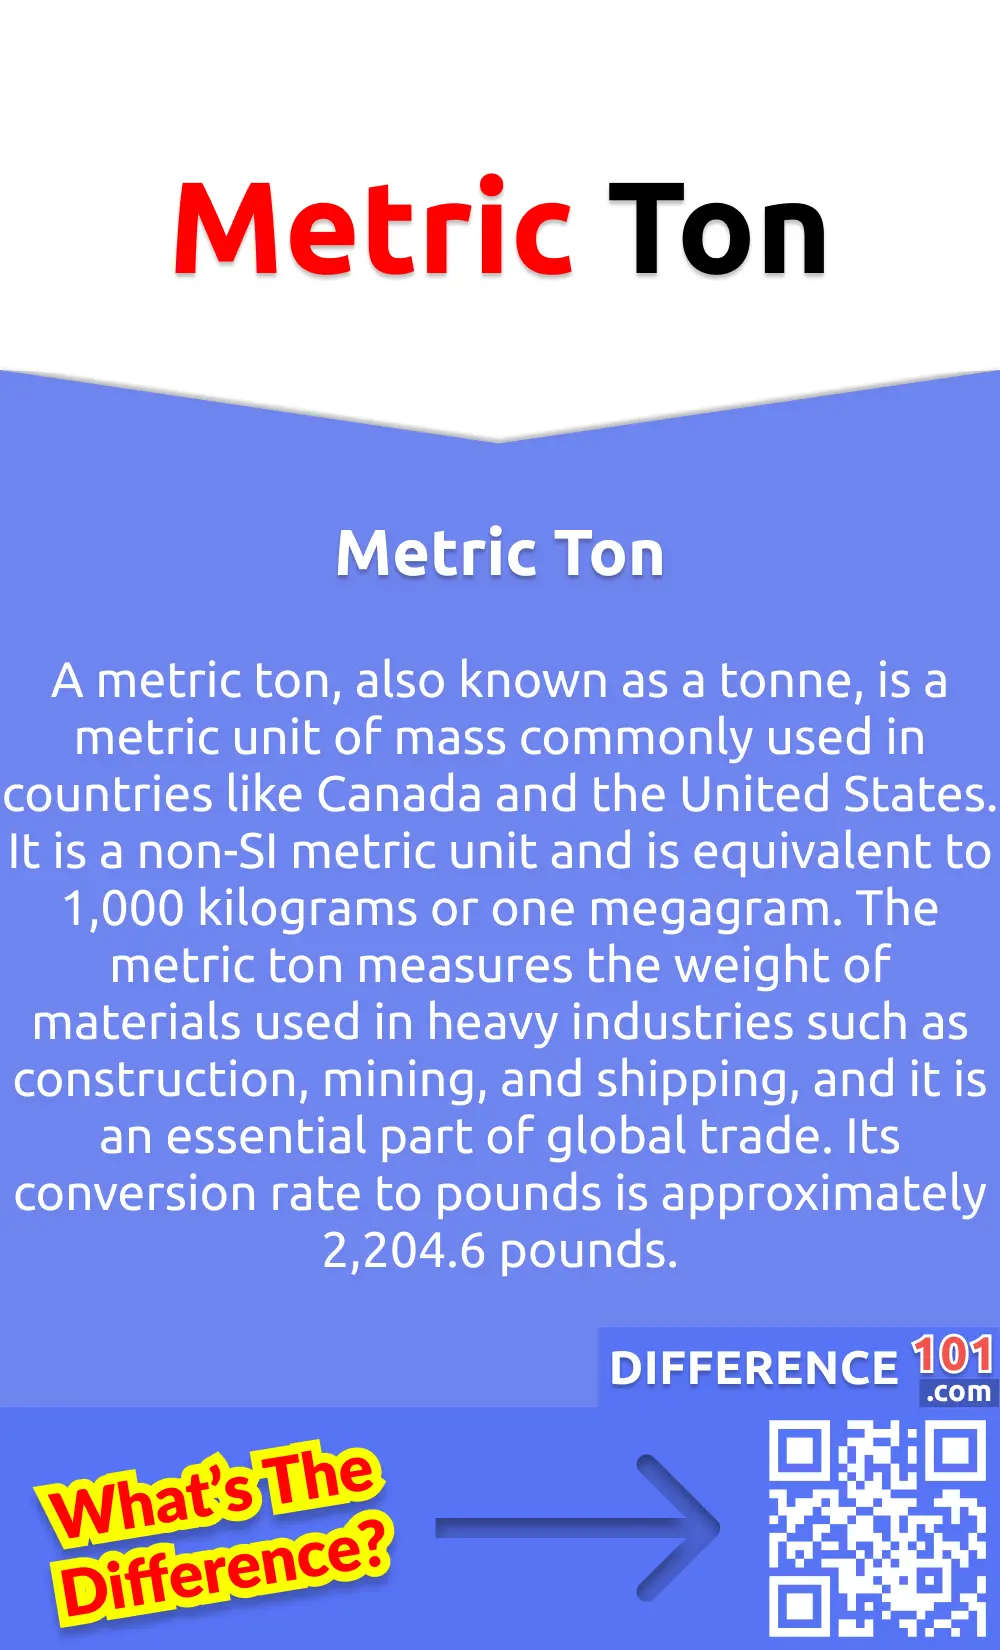 Anekdote scherm incompleet Ton vs. Metric Ton: 5 Key Differences, Pros & Cons, Similarities |  Difference 101